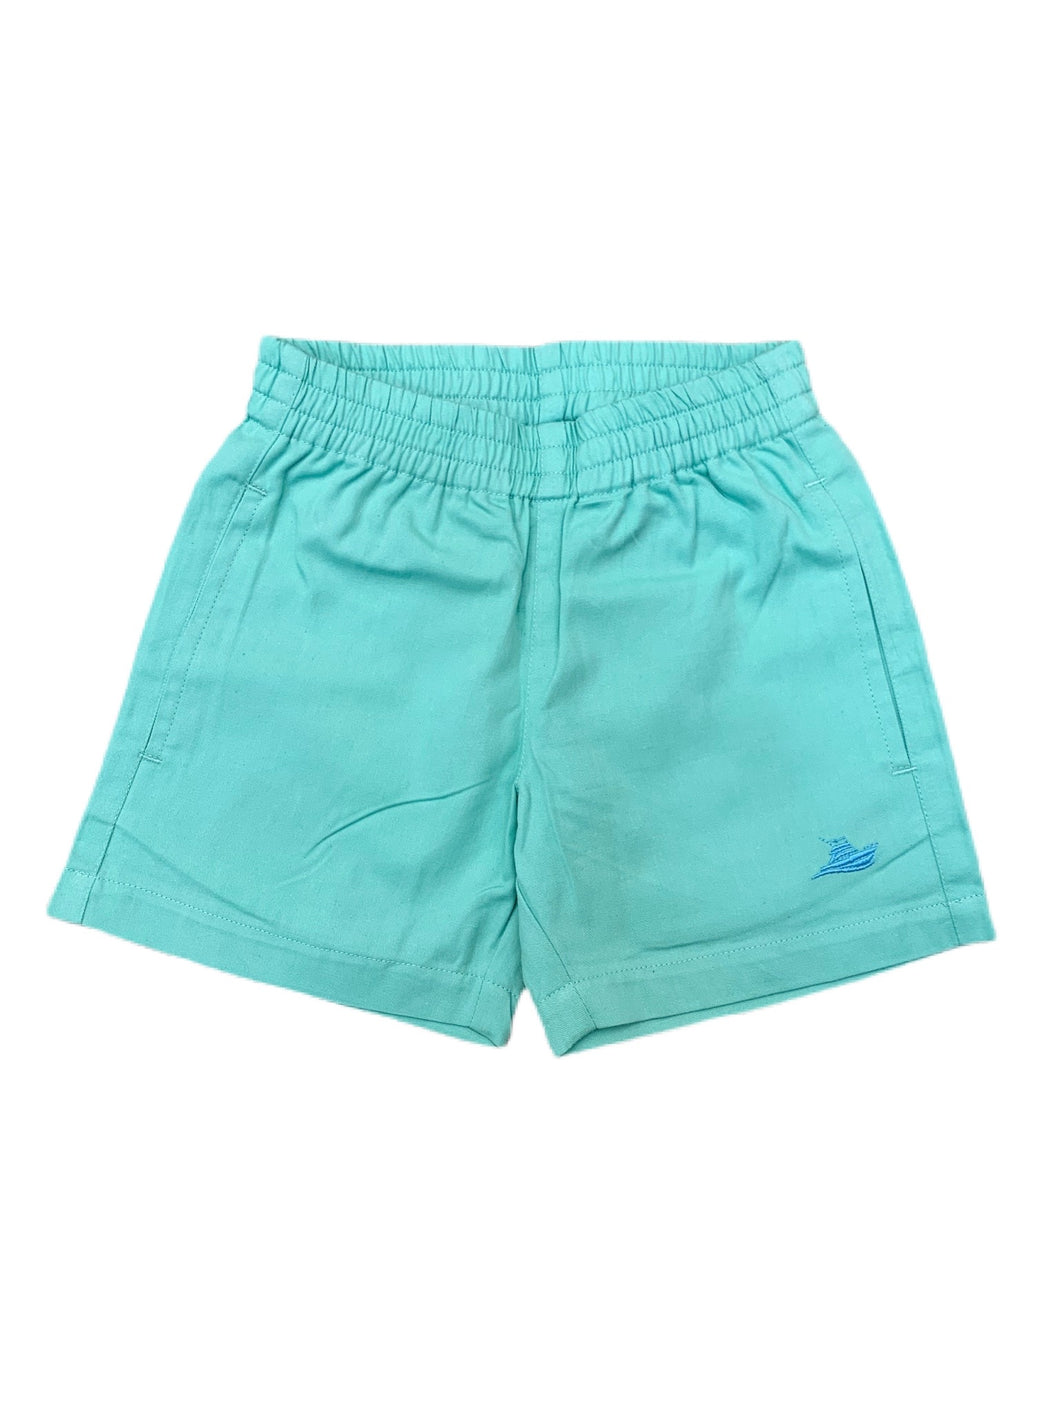 Southbound Opal Green Twill Shorts